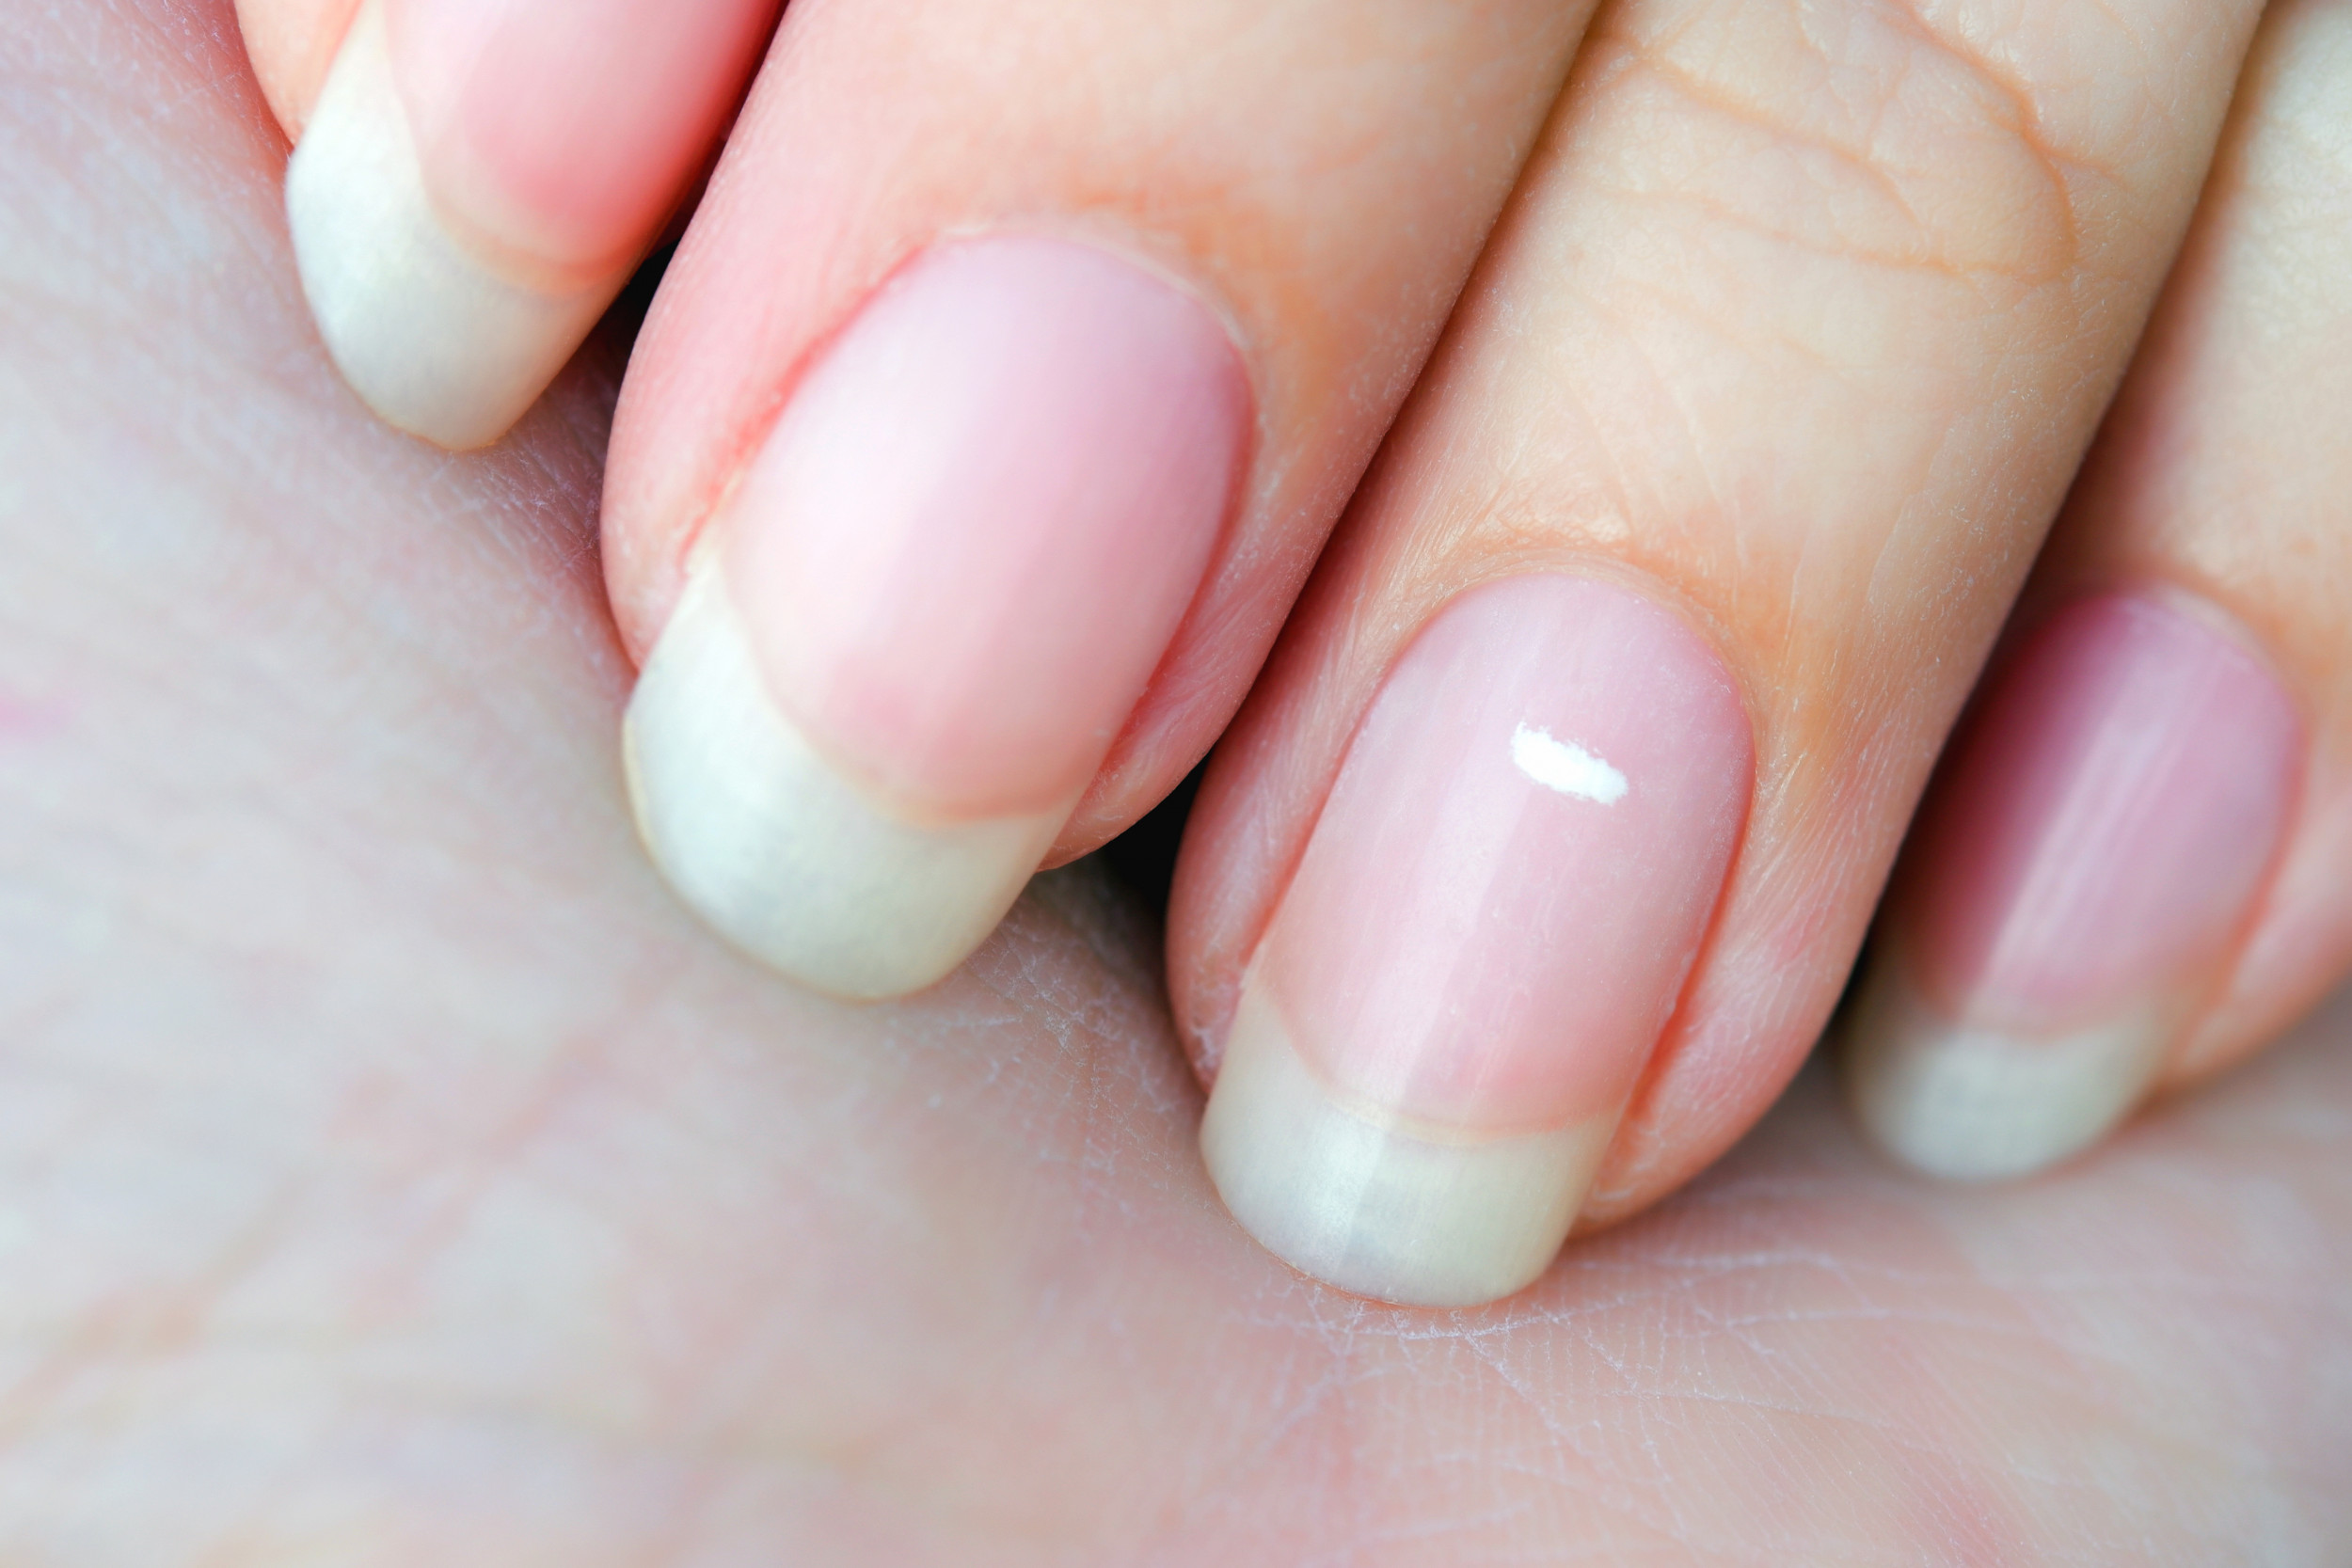 Why are your nails turning yellow and orange? - Quora